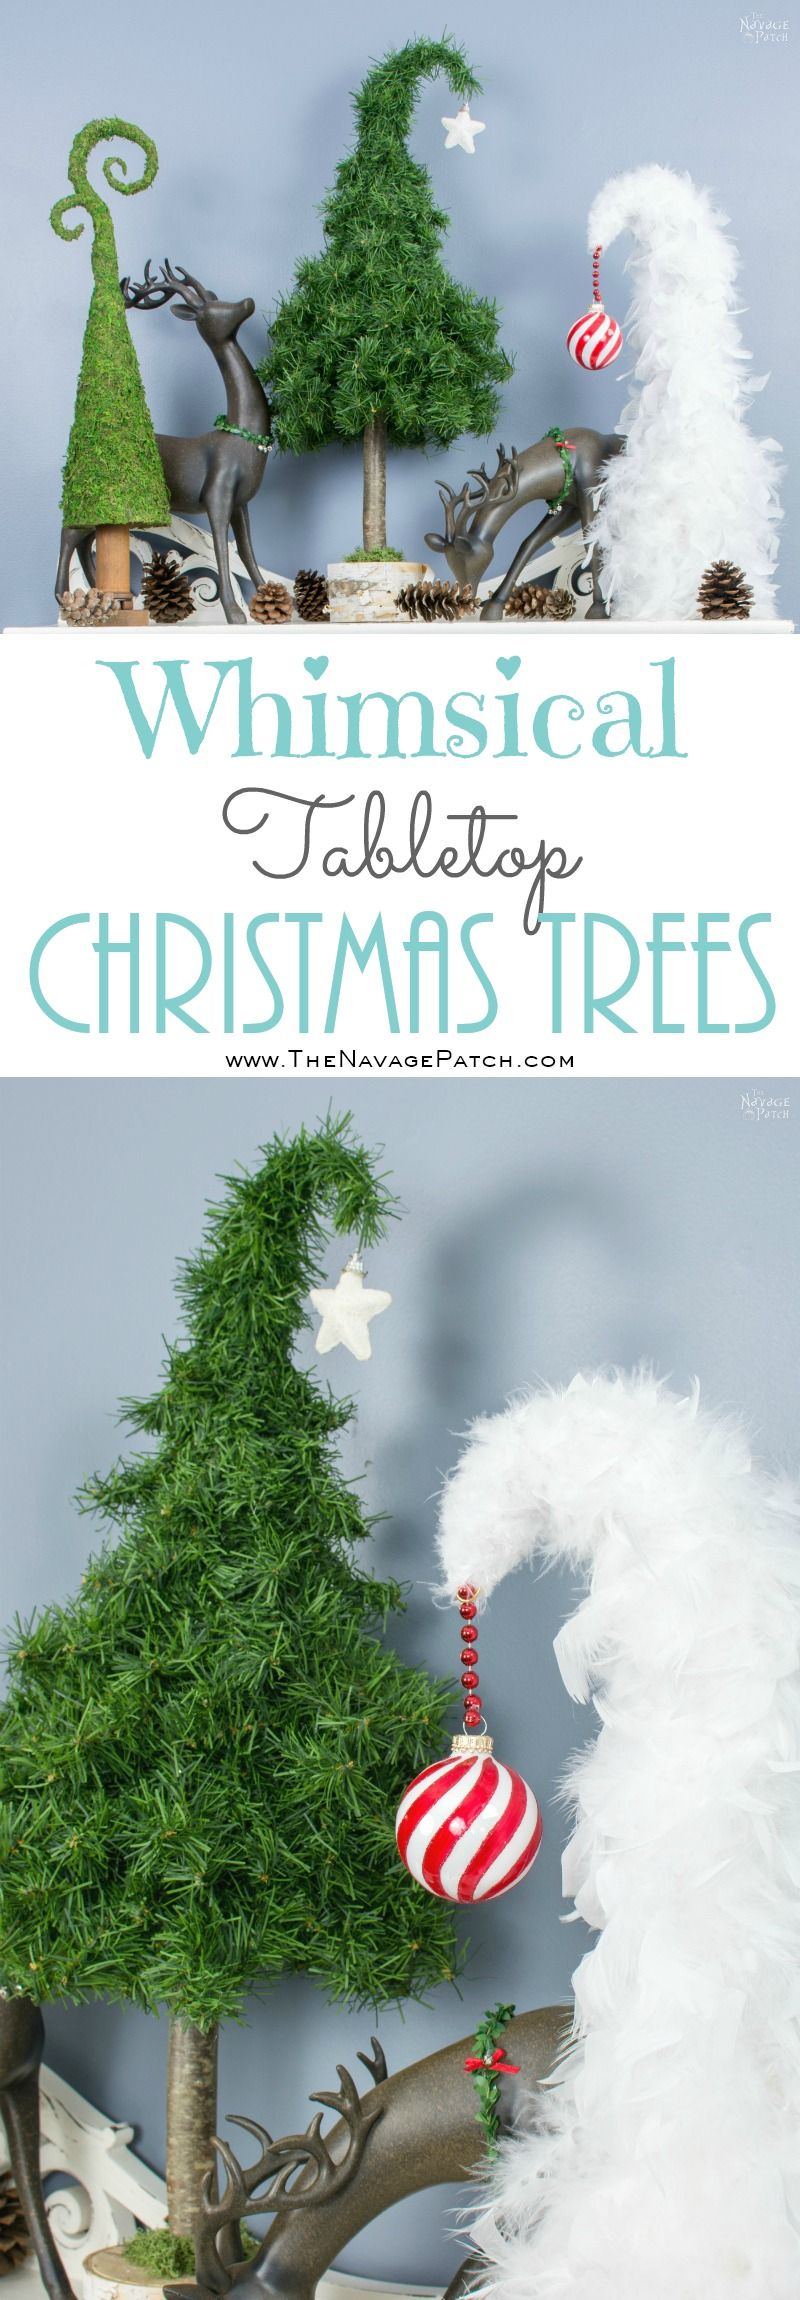 Whimsical Tabletop Christmas Trees | Simple Christmas DIY under 30 minutes | Repurposed and Upcycled holiday decoration | DIY Christmas decoration | #TheNavagePatch #easydiy #Christmas #crafts #DIYChristmas #holidaydecor #upcycled #repurposed #Holidays | TheNavagePatch.com